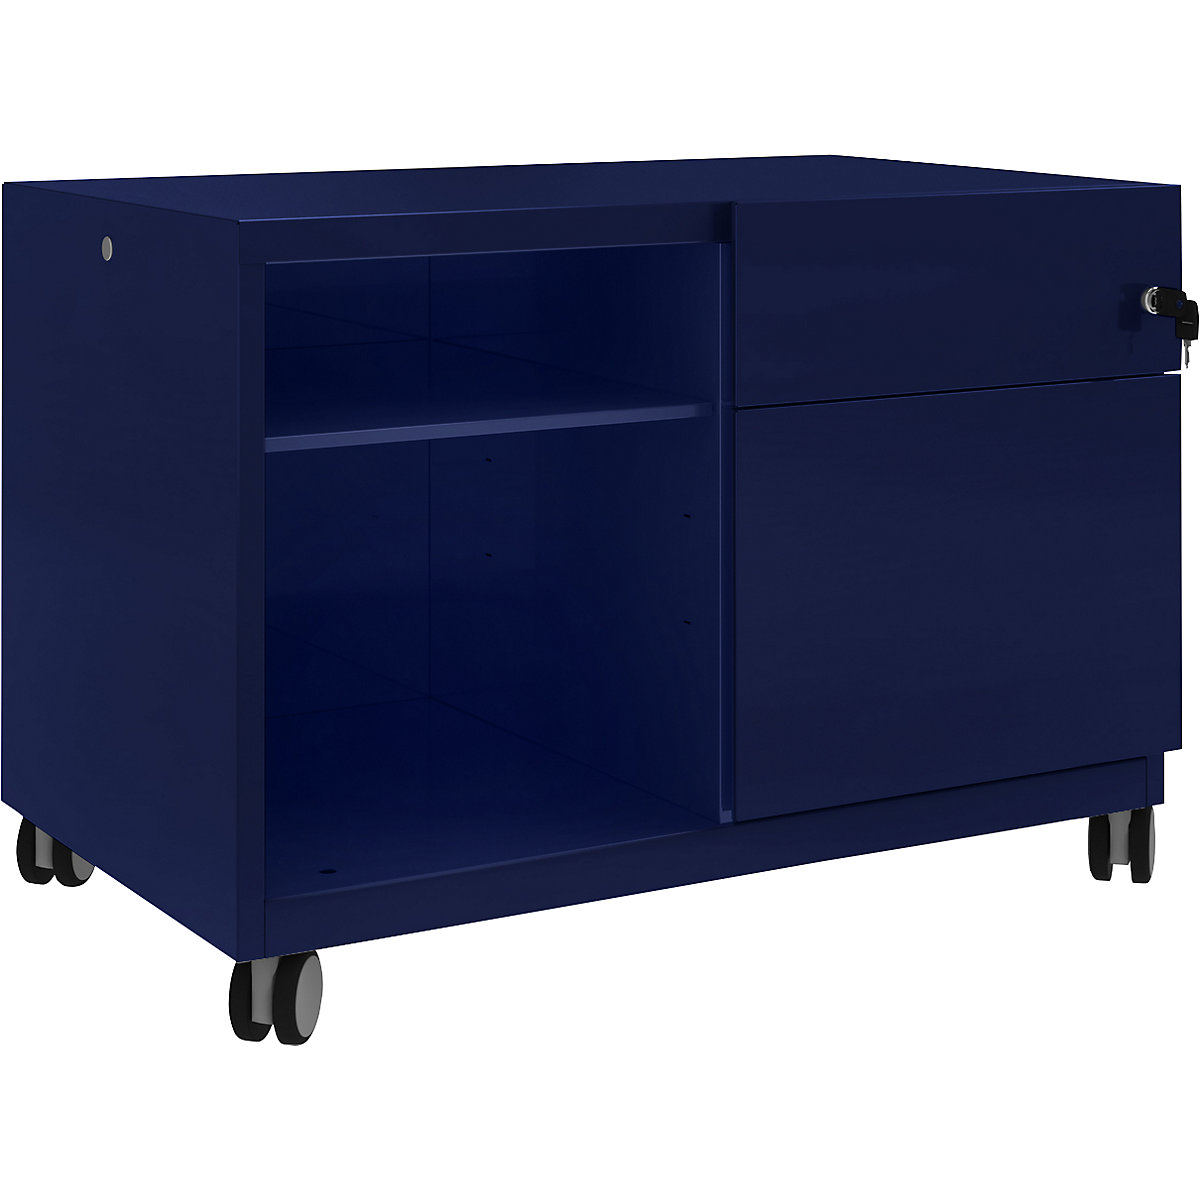 Note™ CADDY, HxBxT 563 x 800 x 490 mm – BISLEY, 1 universal drawer and suspension file drawer on the right, oxford blue-12